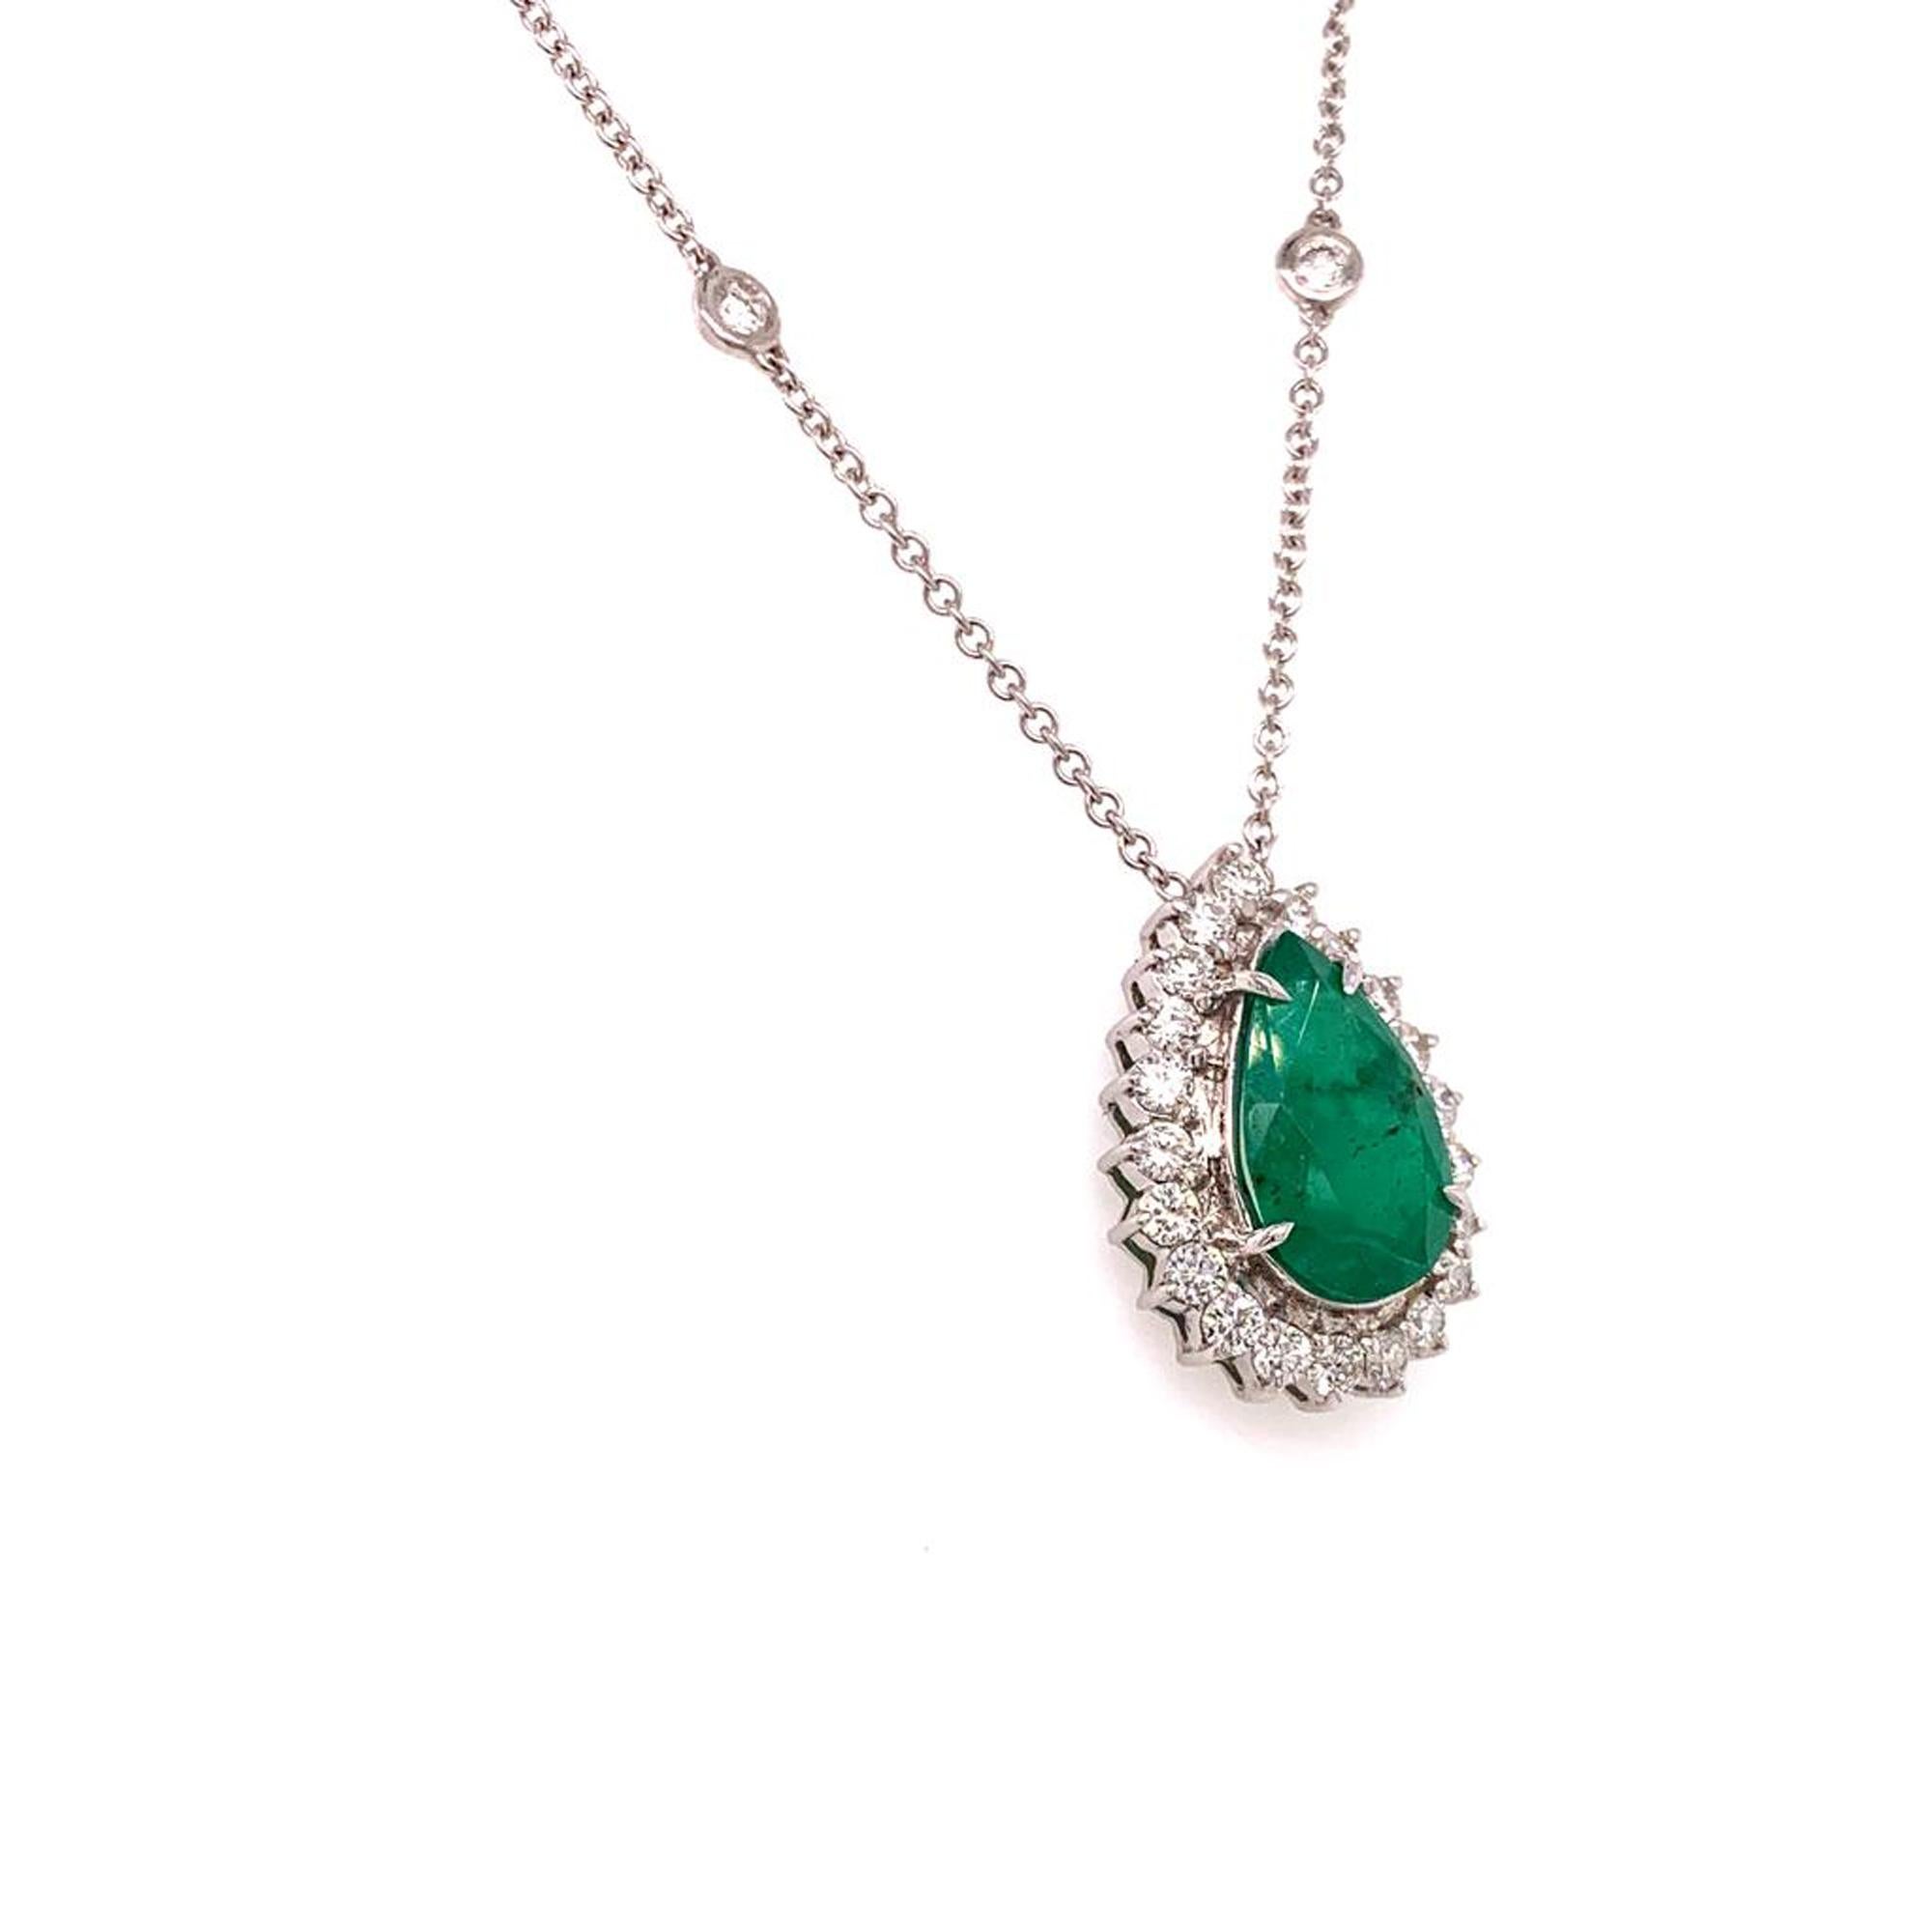 CERTIFIED $6,950 ESTATE LARGE EMERALD & DIAMOND NECKLACE 18 INCHES 18 KT WHITE GOLD 5 CARAT WEIGHT

This is a One of a Kind Unique Custom Made Glamorous Piece of Jewelry!

Nothing says, “I Love you” more than Diamonds and Pearls!

Gemological